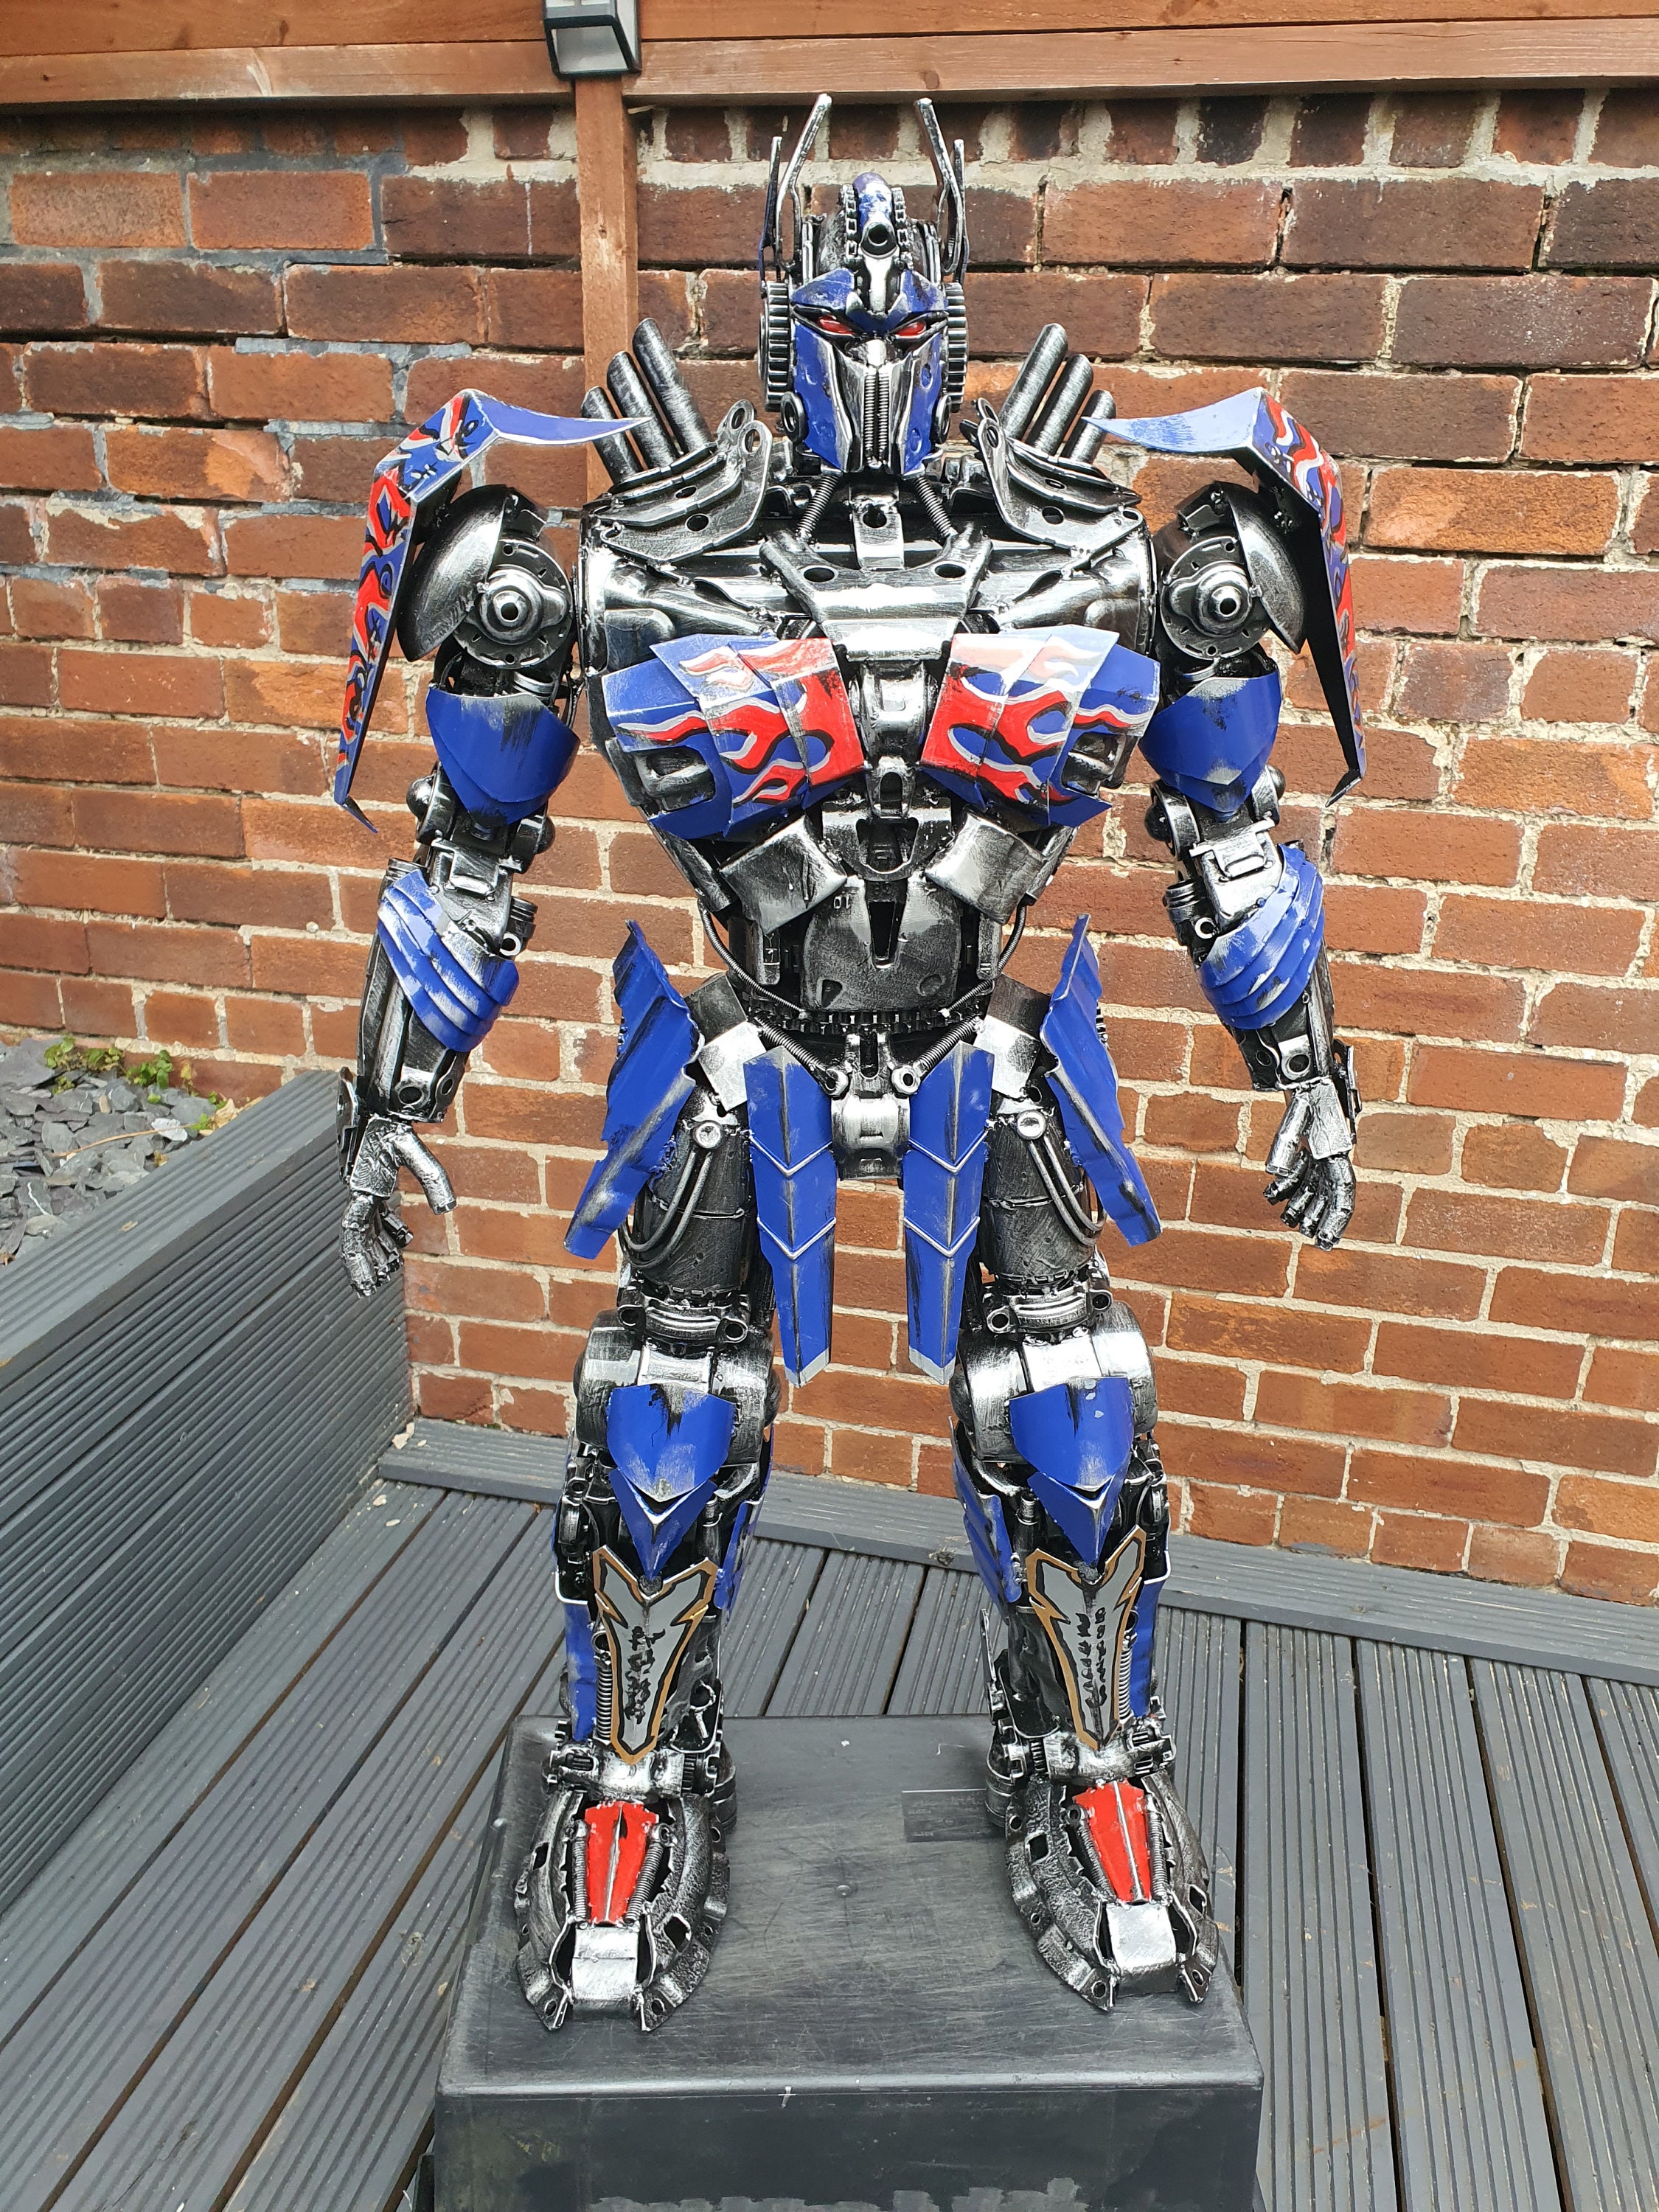 Transformers Optimus Prime 120cm Sci-fi Handmade Recycled Metal Art  Productions Sculpture - Etsy